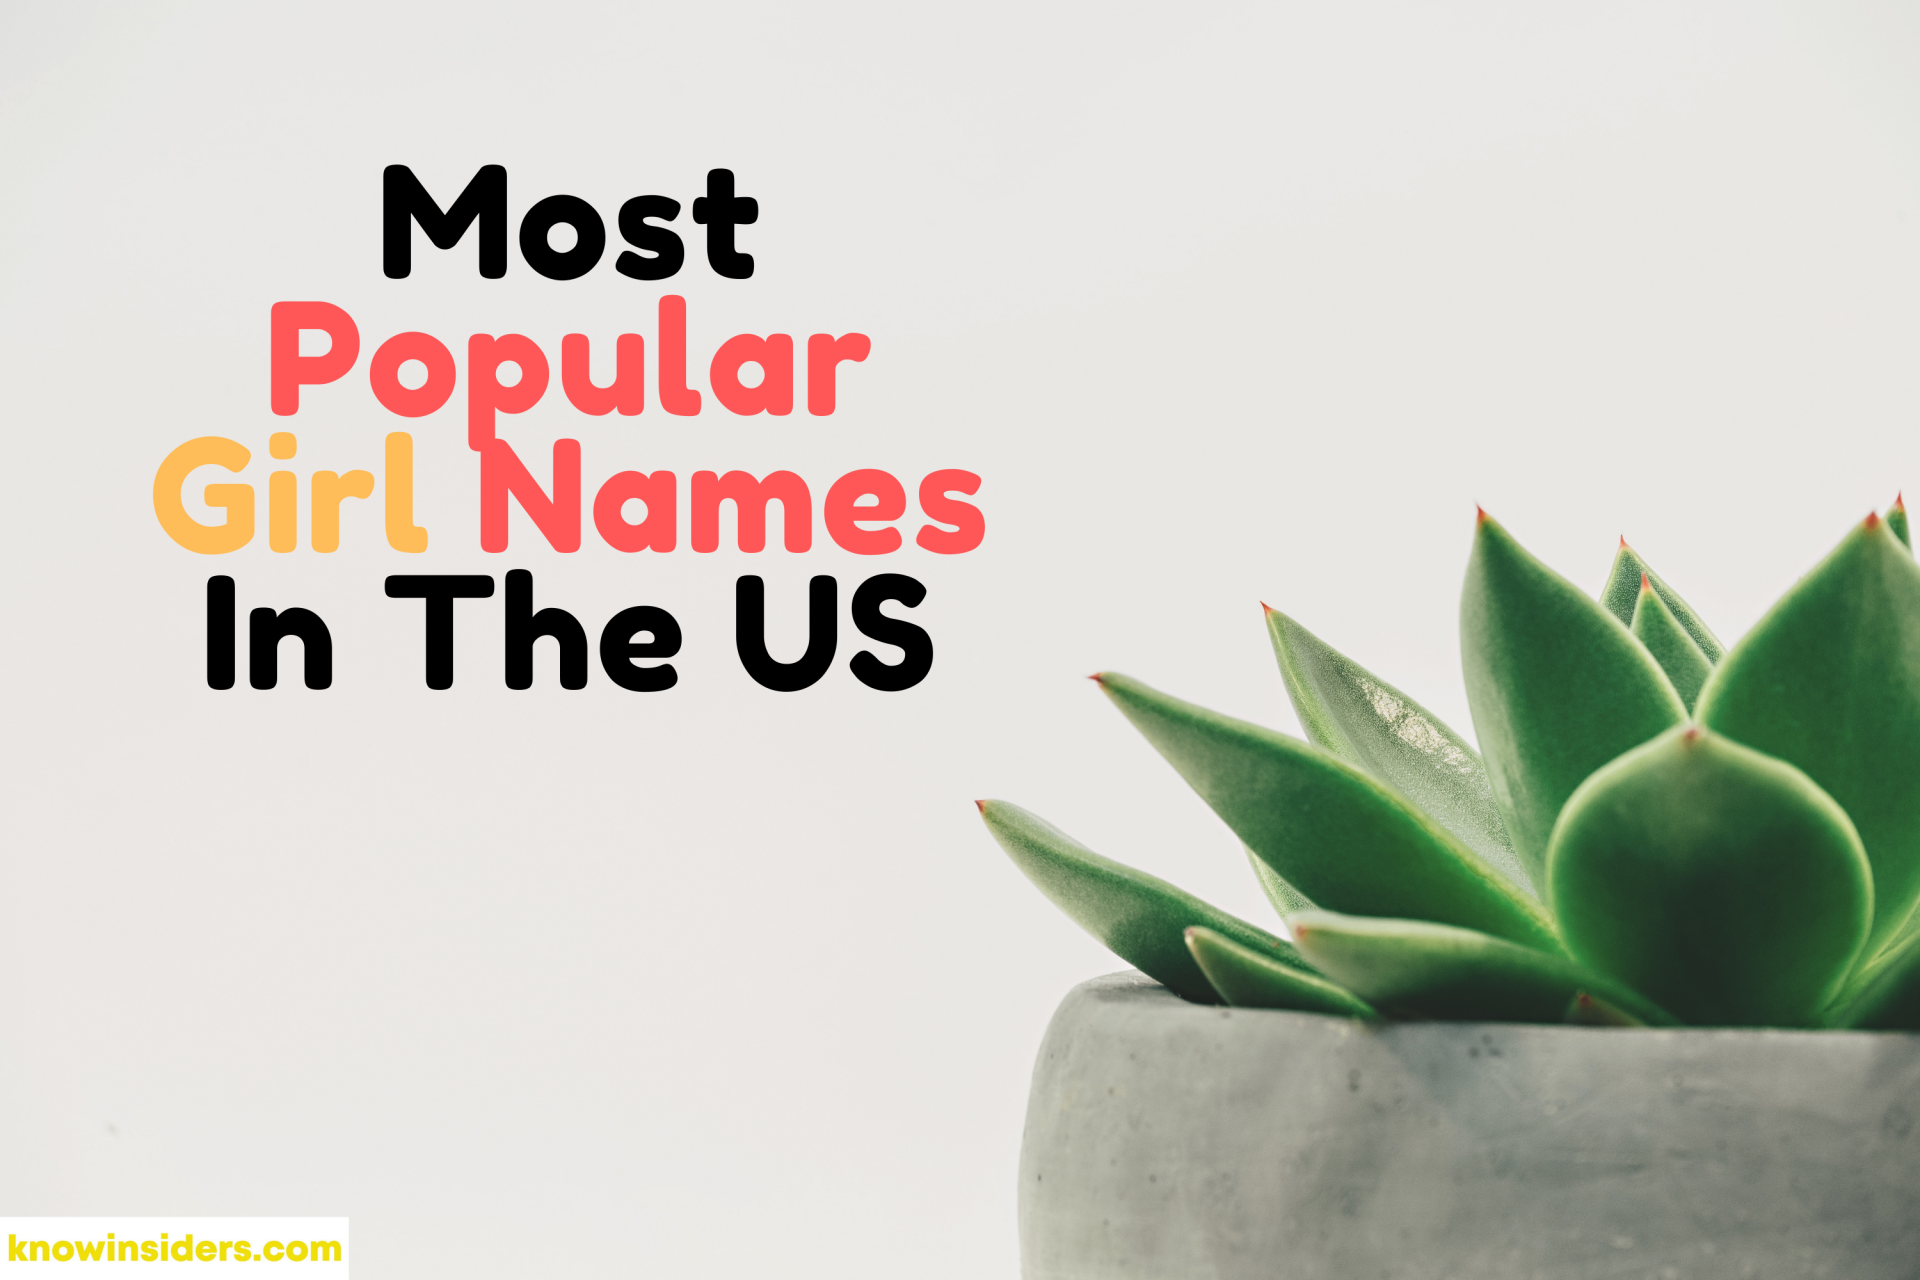 Top 4 Most Popular Girl Names In The US In The 21st Century